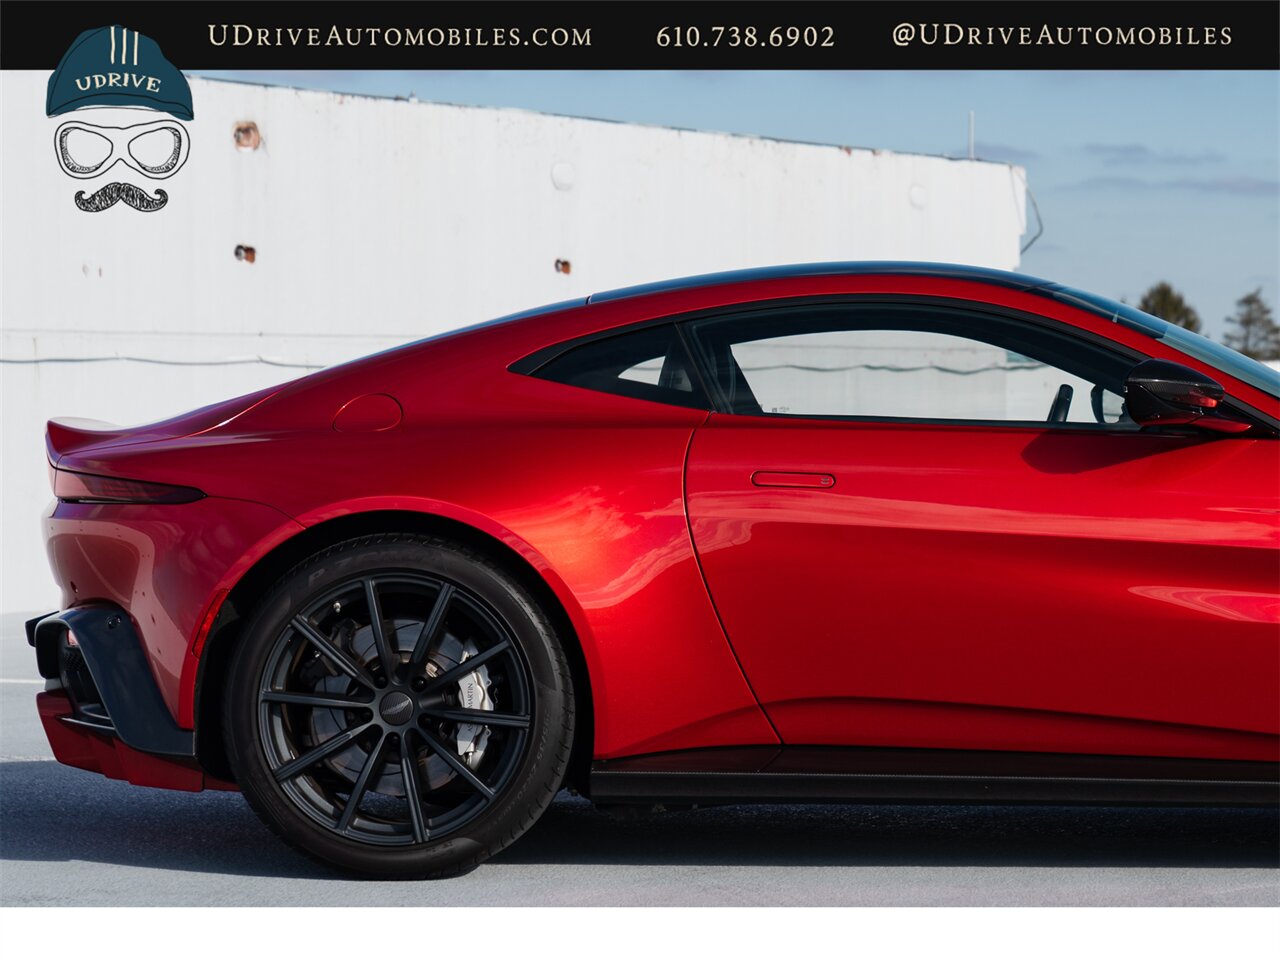 2019 Aston Martin Vantage  Incredibly Spec Rare Q Exclusive Fiamma Red $222k MSRP 1 of a Kind CPO - Photo 21 - West Chester, PA 19382